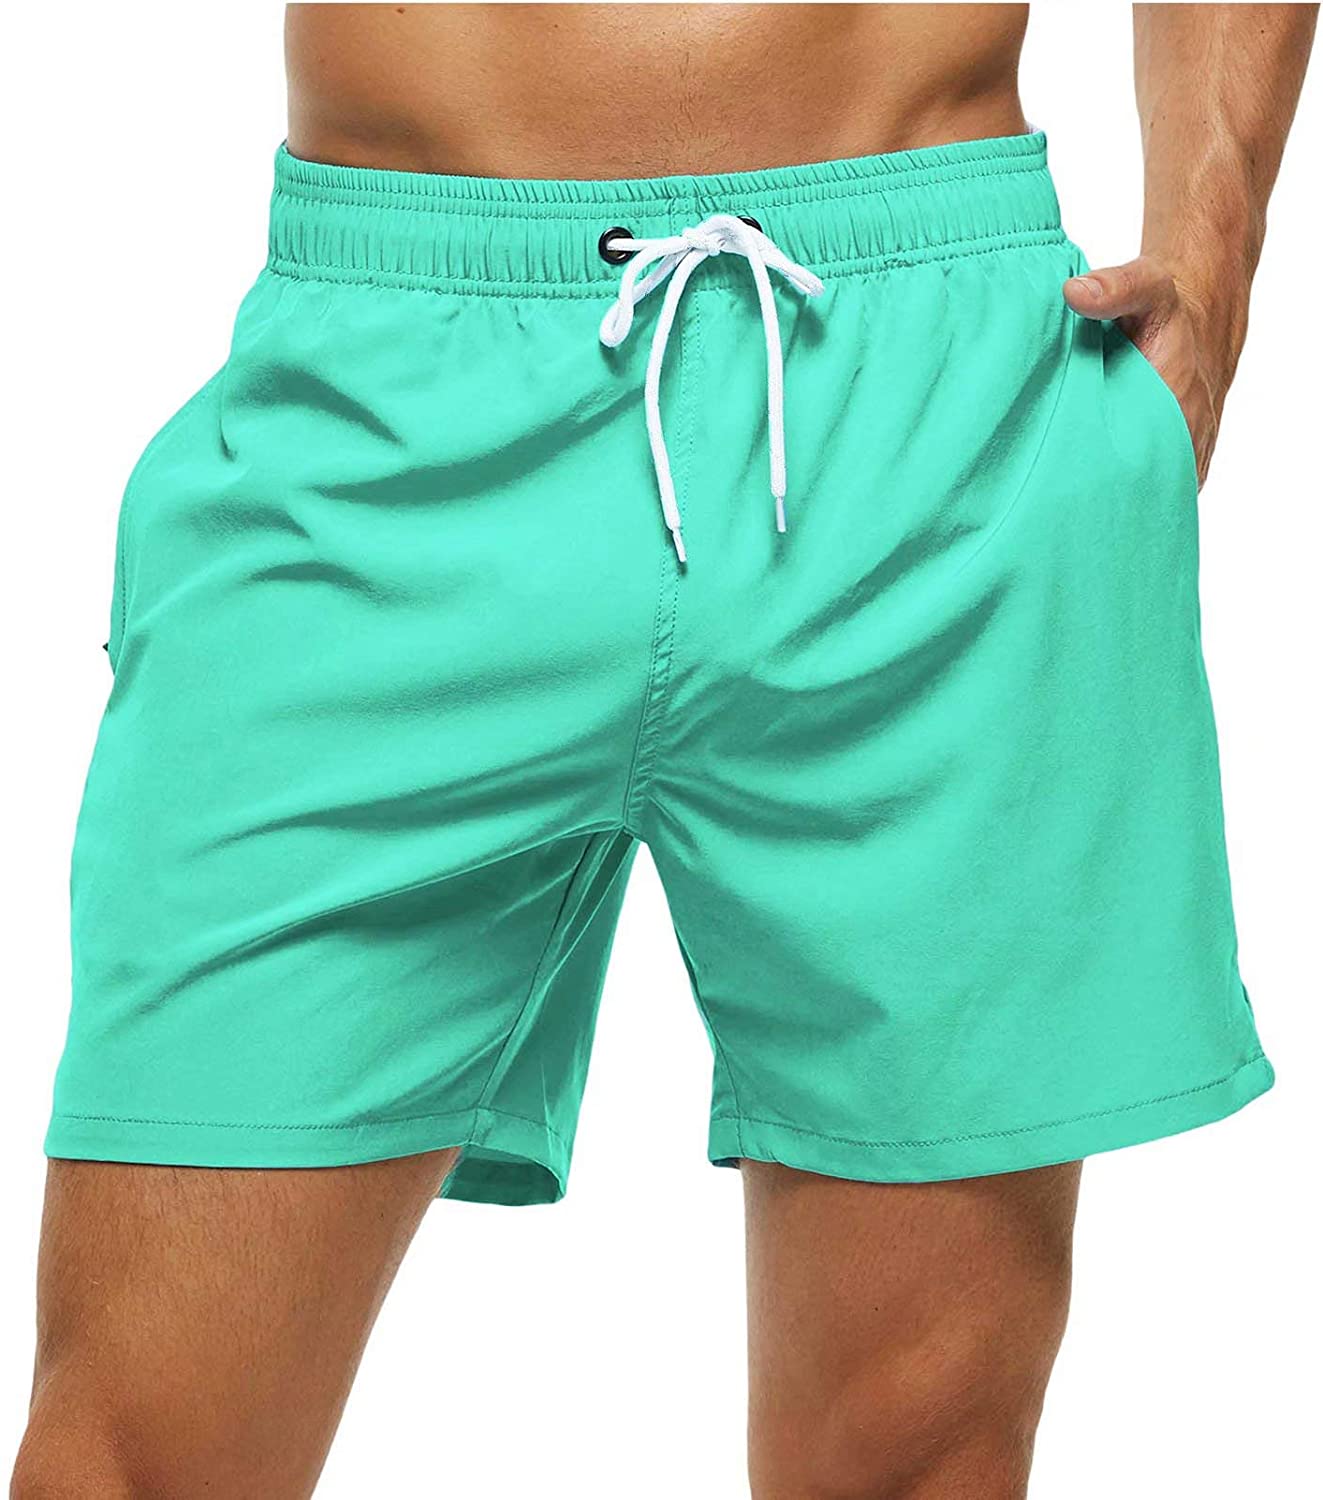 Tyhengta Mens Swim Trunks Quick Dry Beach Shorts with Zipper Pockets and Mesh Lining